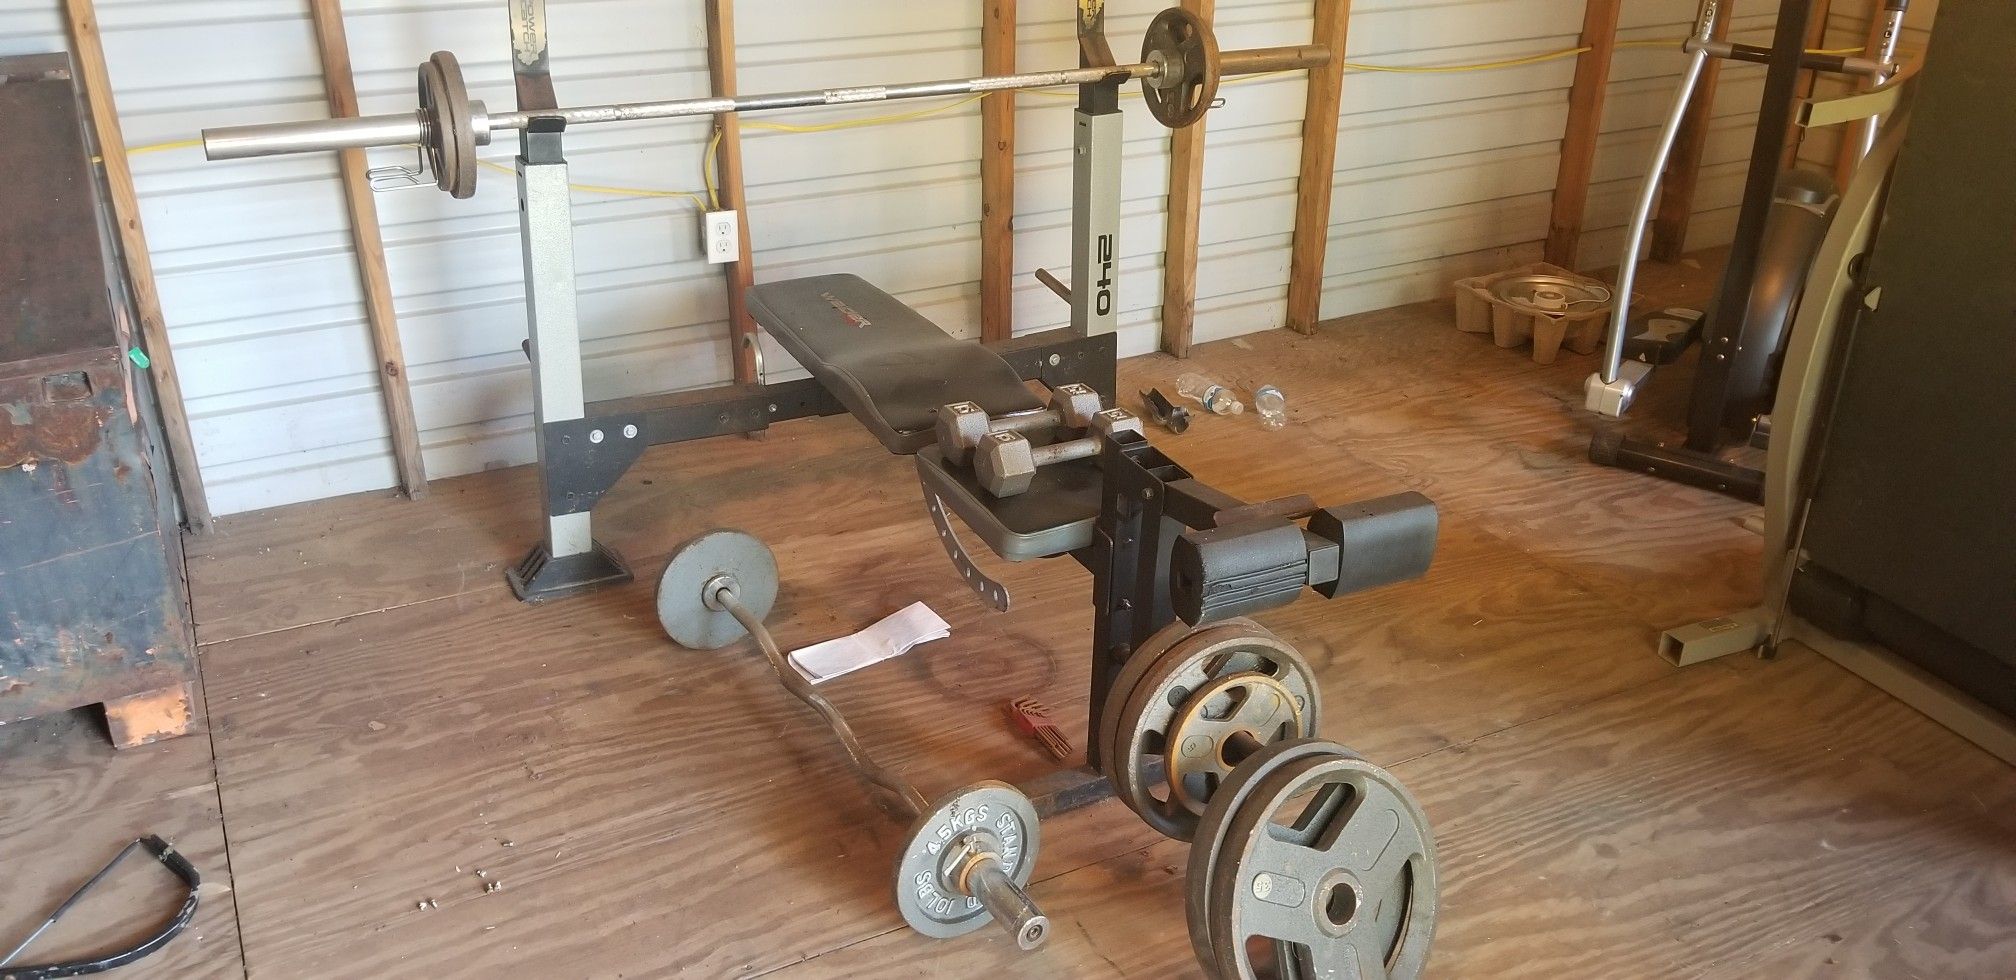 Weight bench, curlbar, barbell, dumbbells, and weight plates